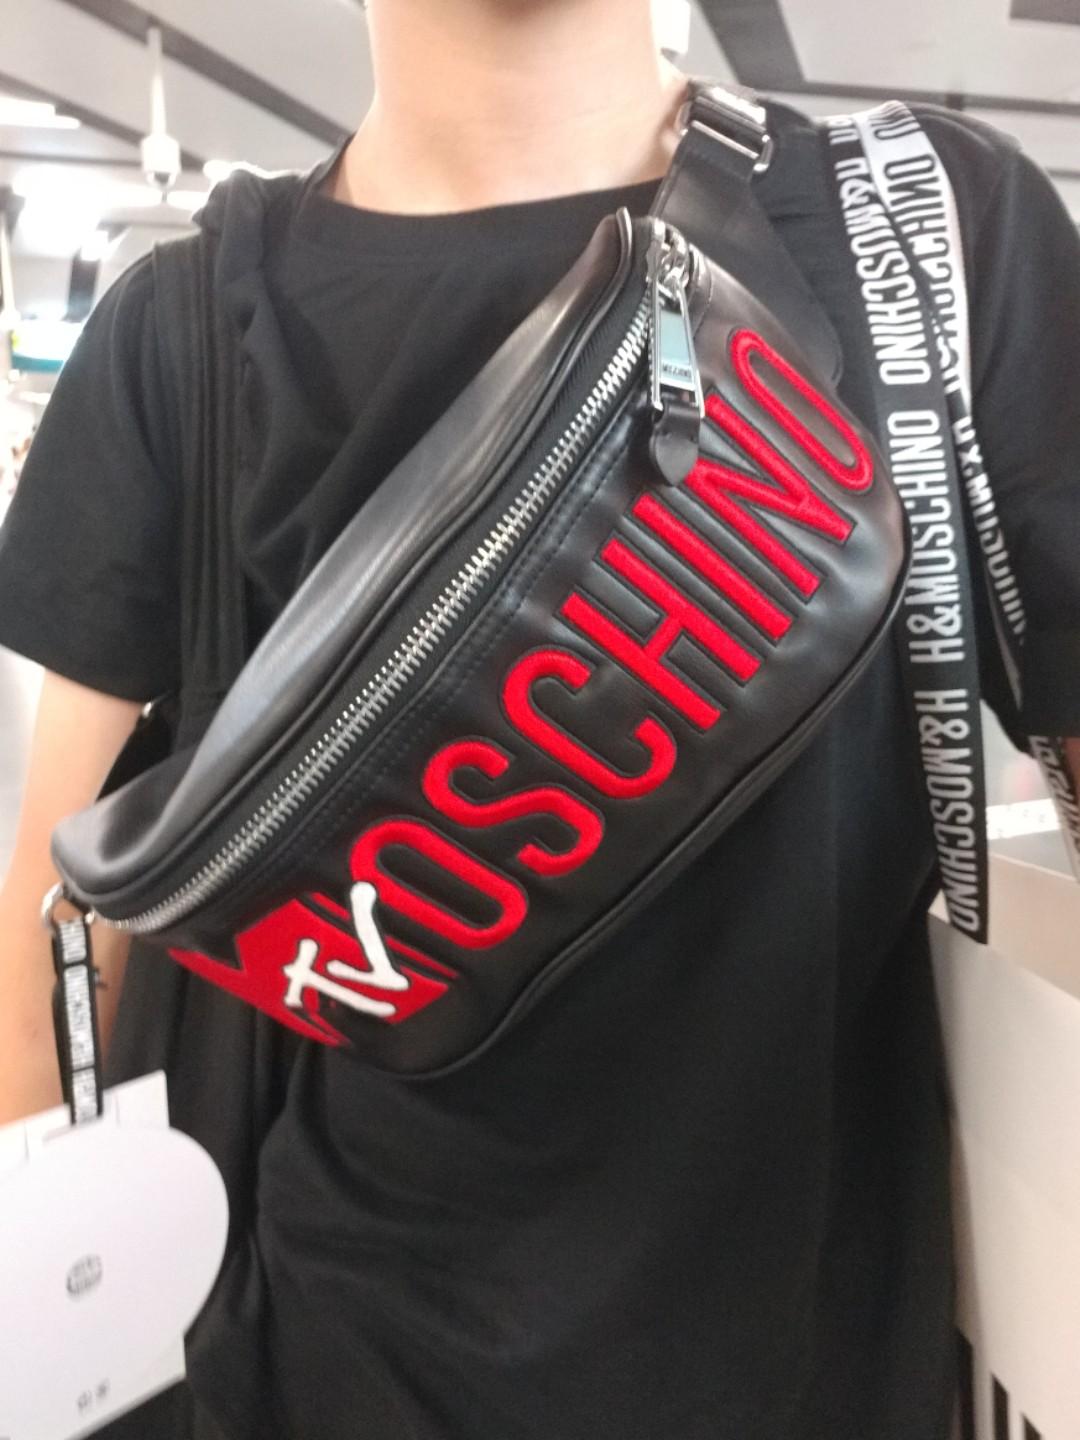 h&m moschino fanny pack